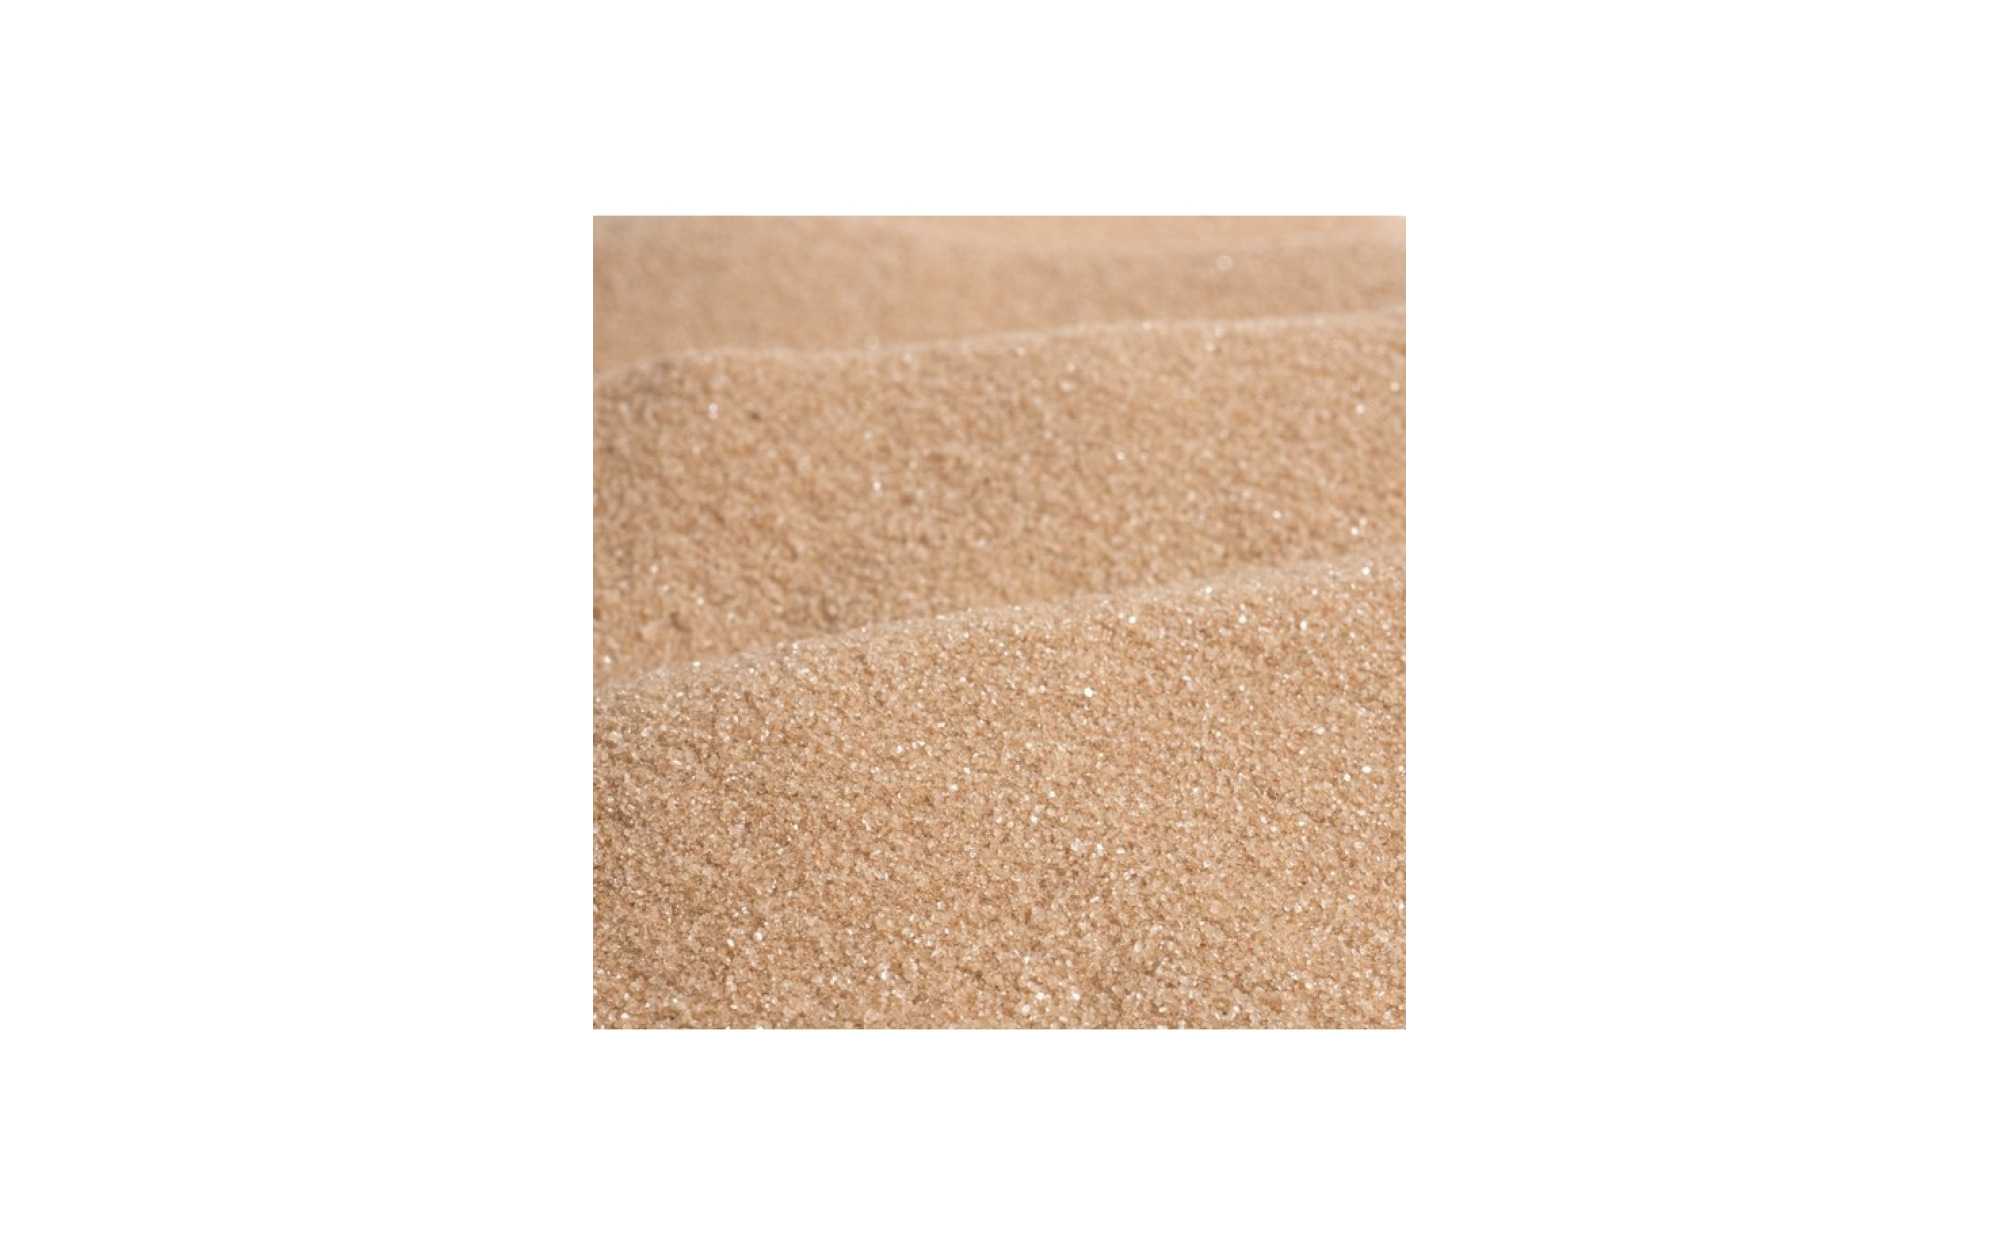 Sandtastik® Therapy Play Sand, Beach, 25 lb - Colored Sand Company